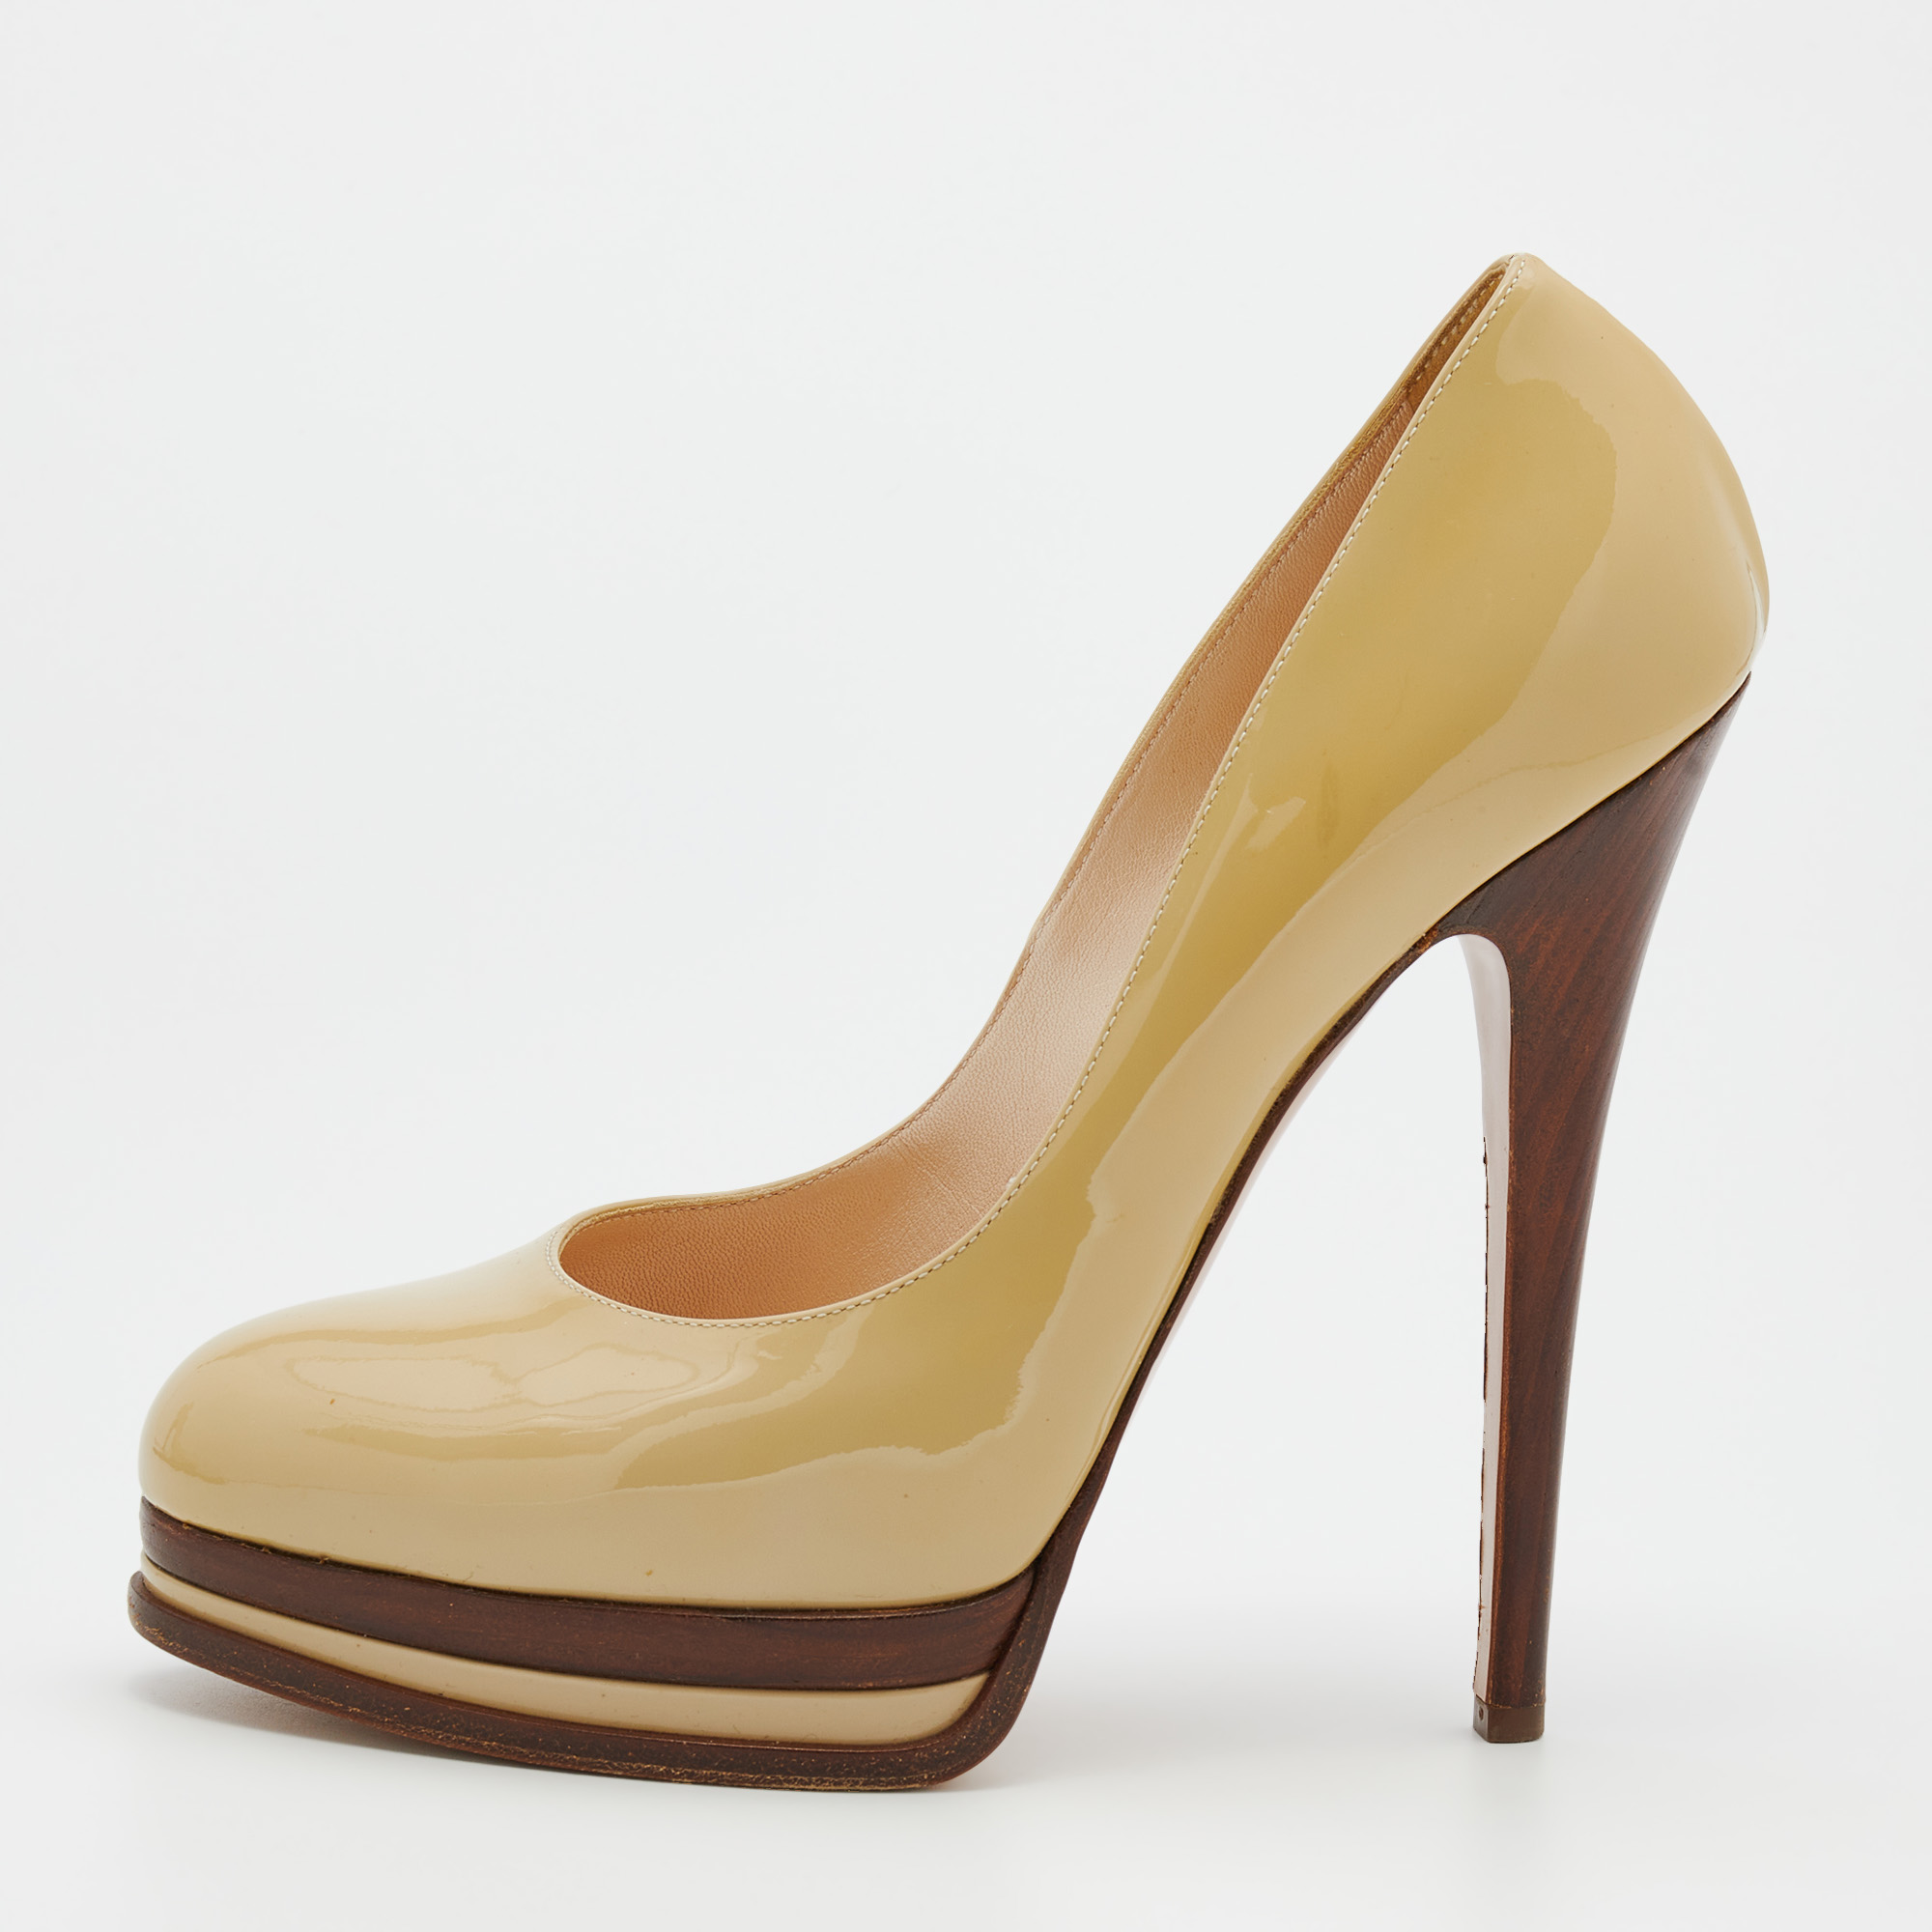 It is time to flaunt the subtly charming look with this pair of patent leather pumps. This pair of Casadei pumps have low platforms and tall stiletto heels. Lighten up the day with this pair of cheerful beige pumps